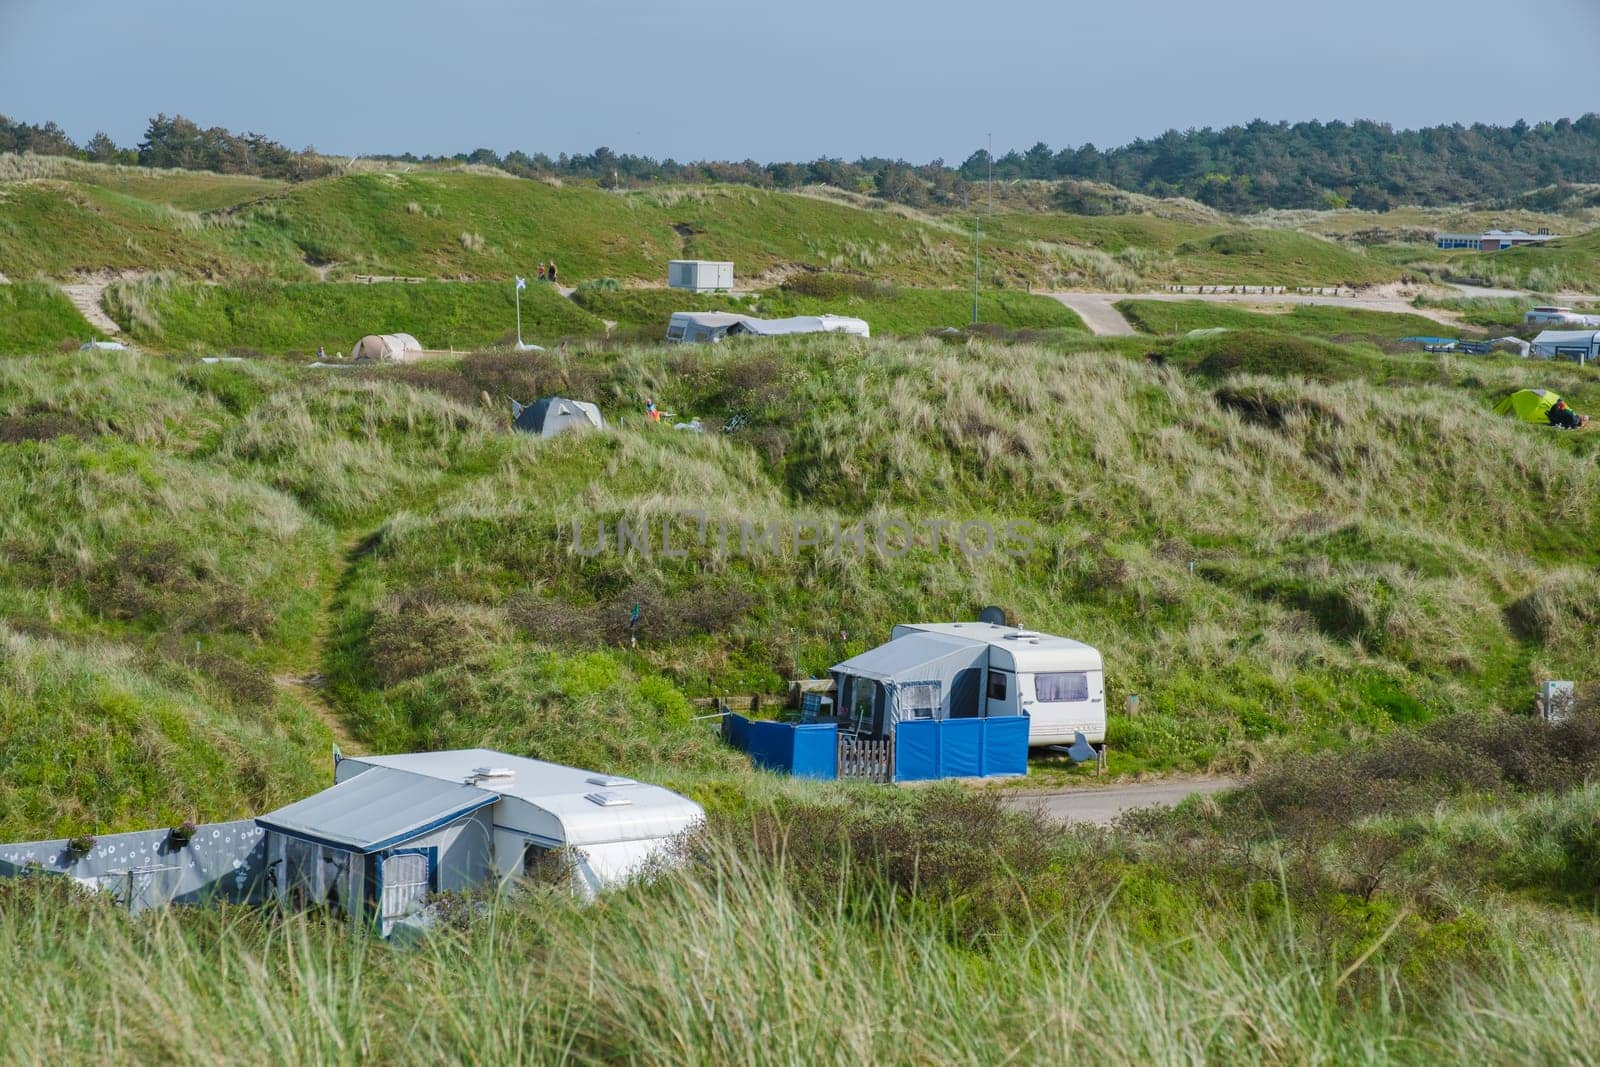 A scenic view of multiple recreational vehicles parked in a lush grassy area, blending harmoniously with nature in Texel, Netherlands.